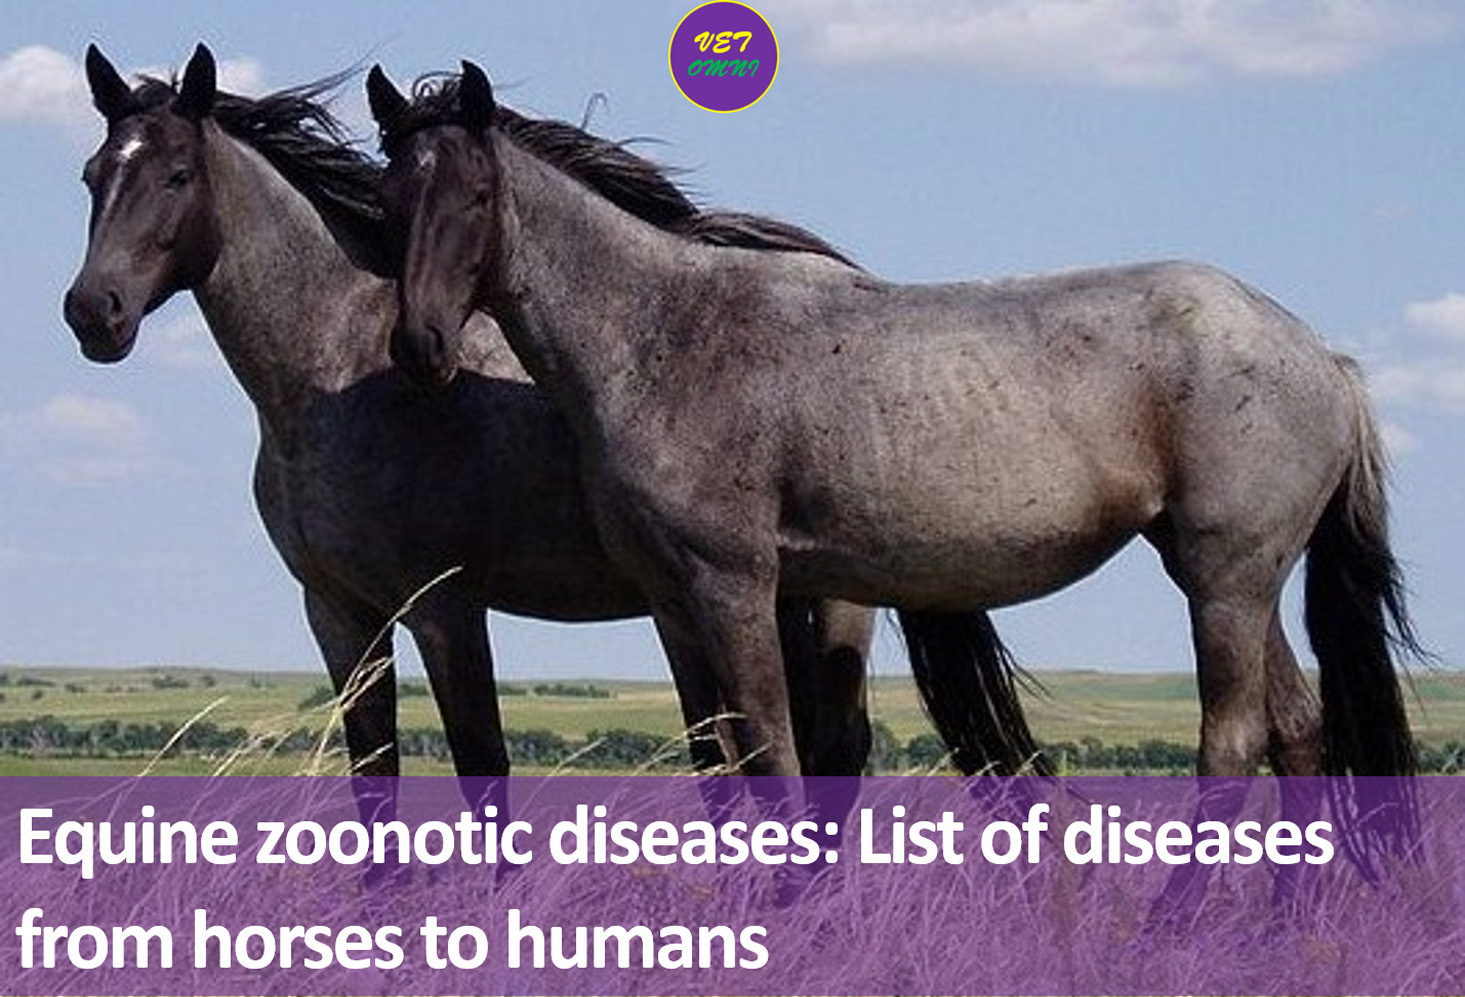 Edited image - Equine zoonotic diseases: List of diseases from horses to humans